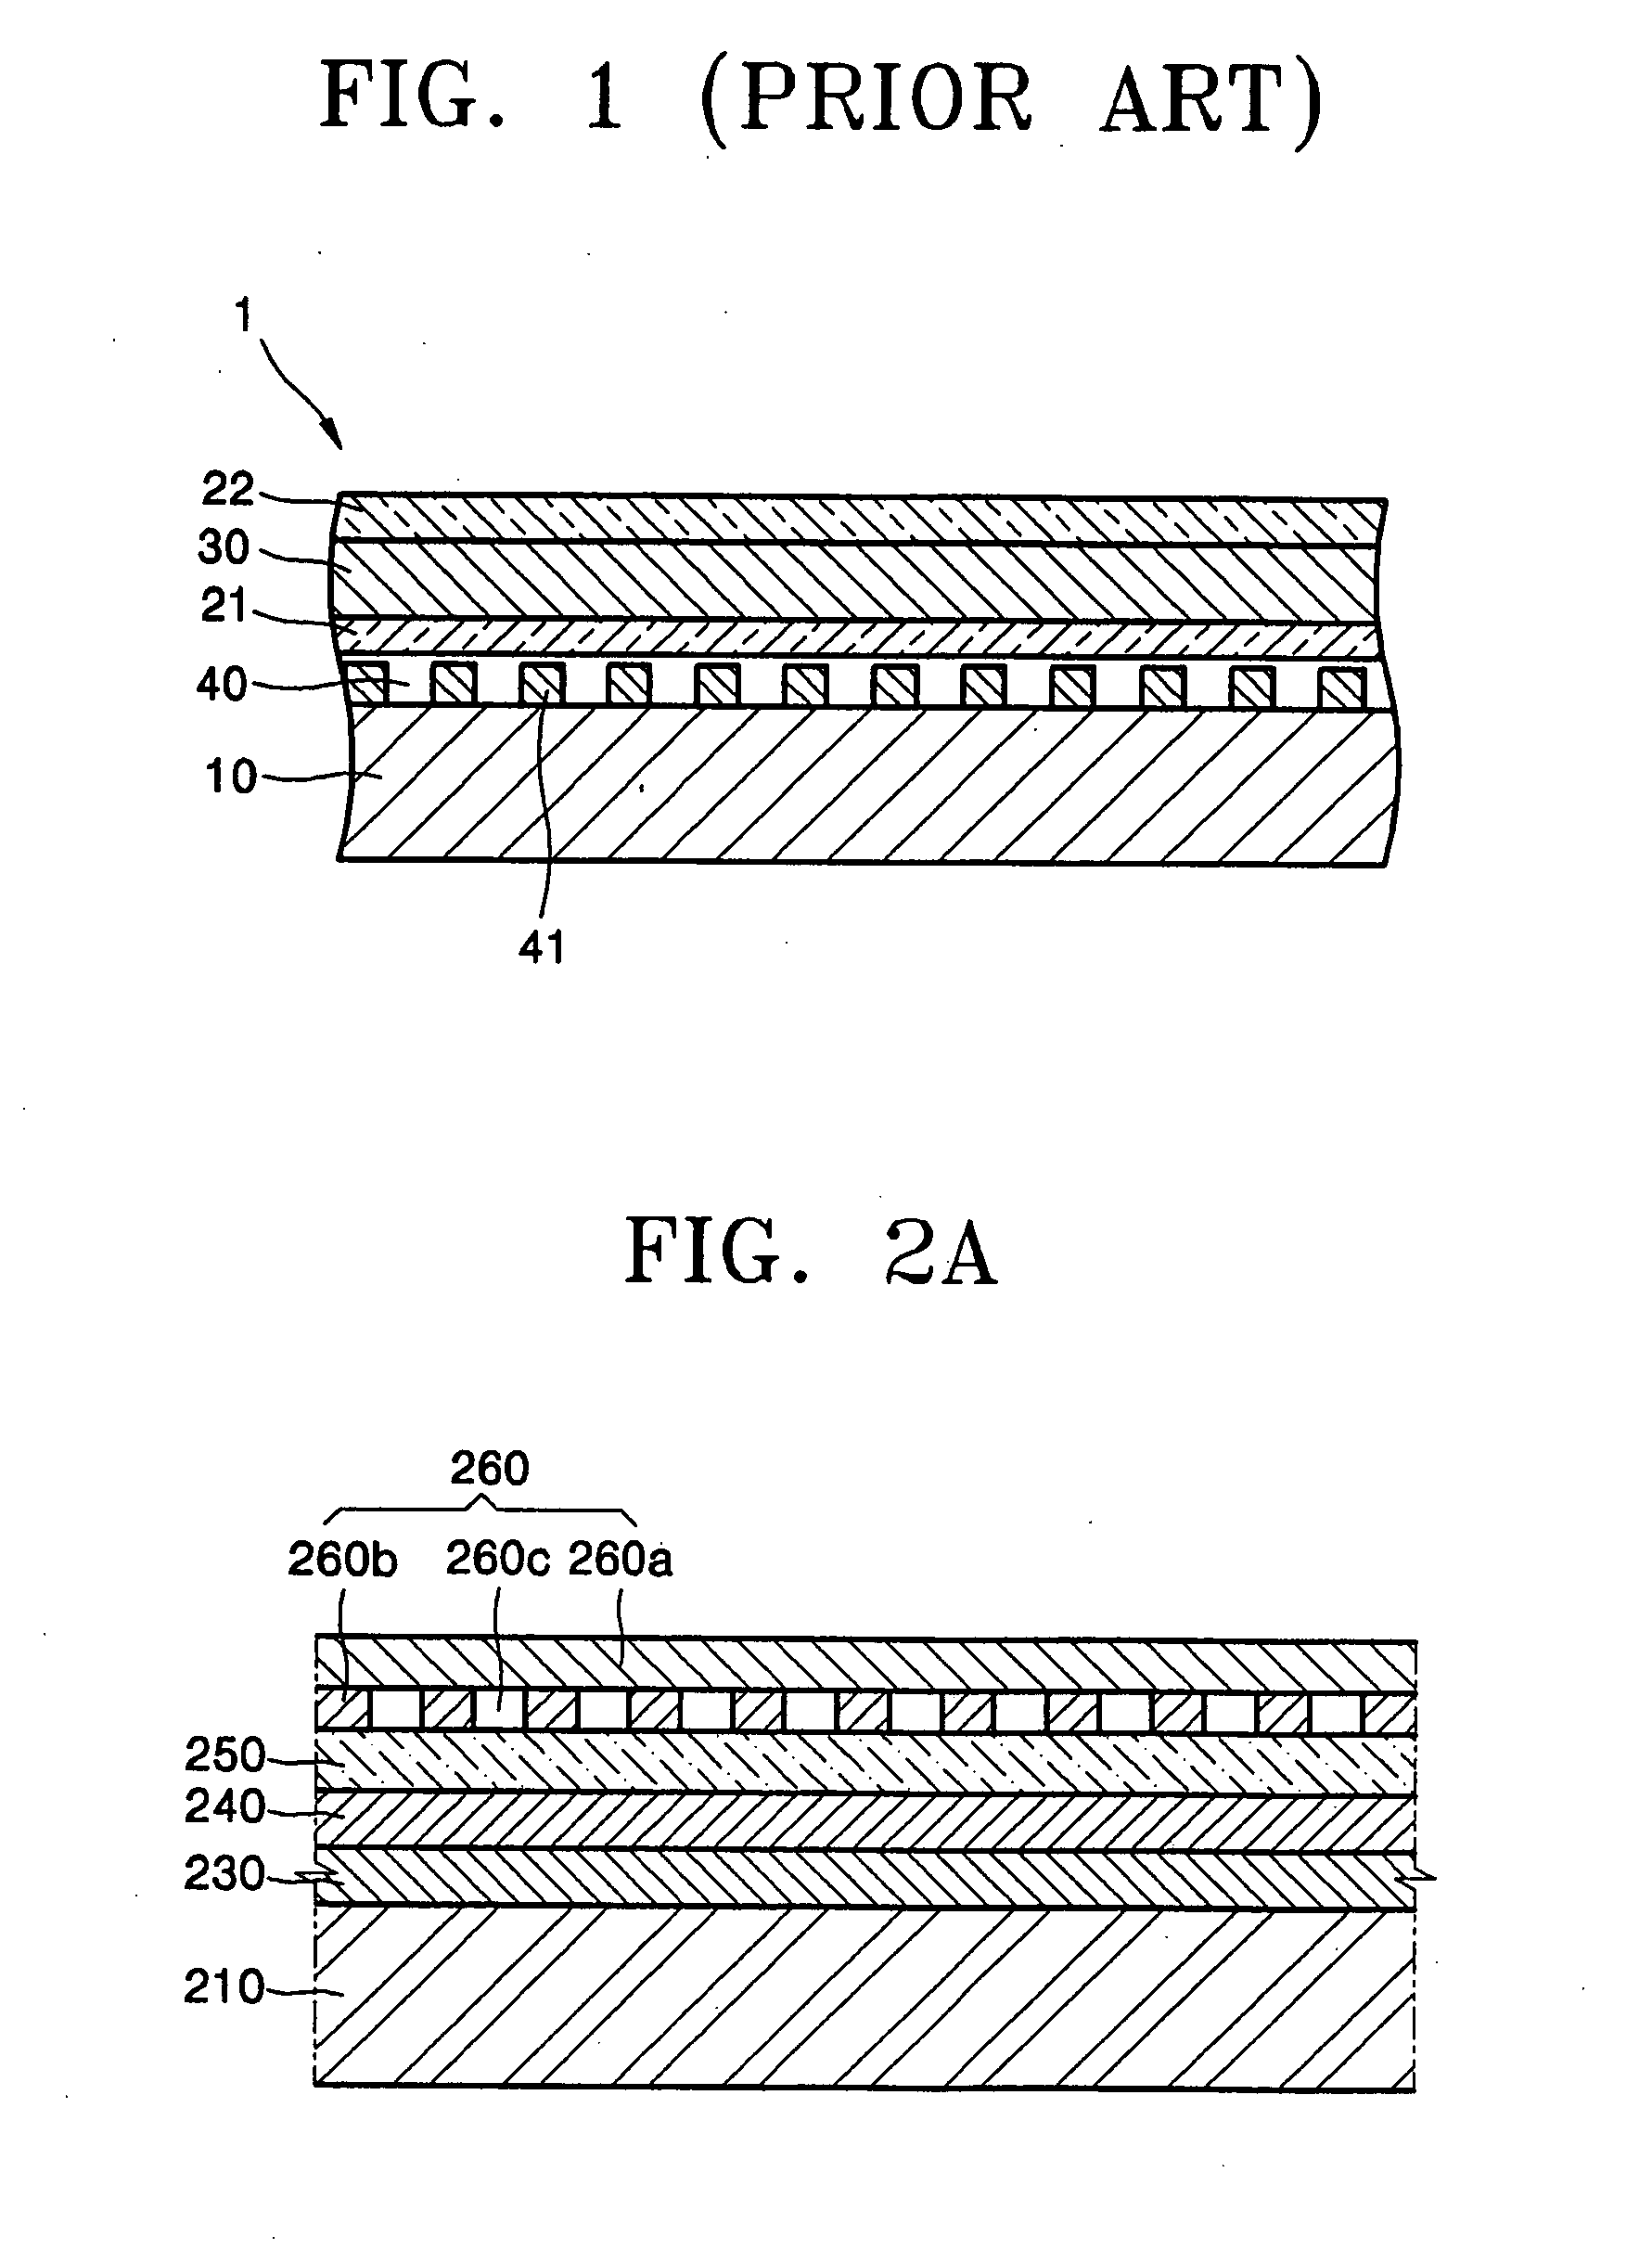 Electroluminescent display device and thermal transfer donor film for the electroluminescent display device